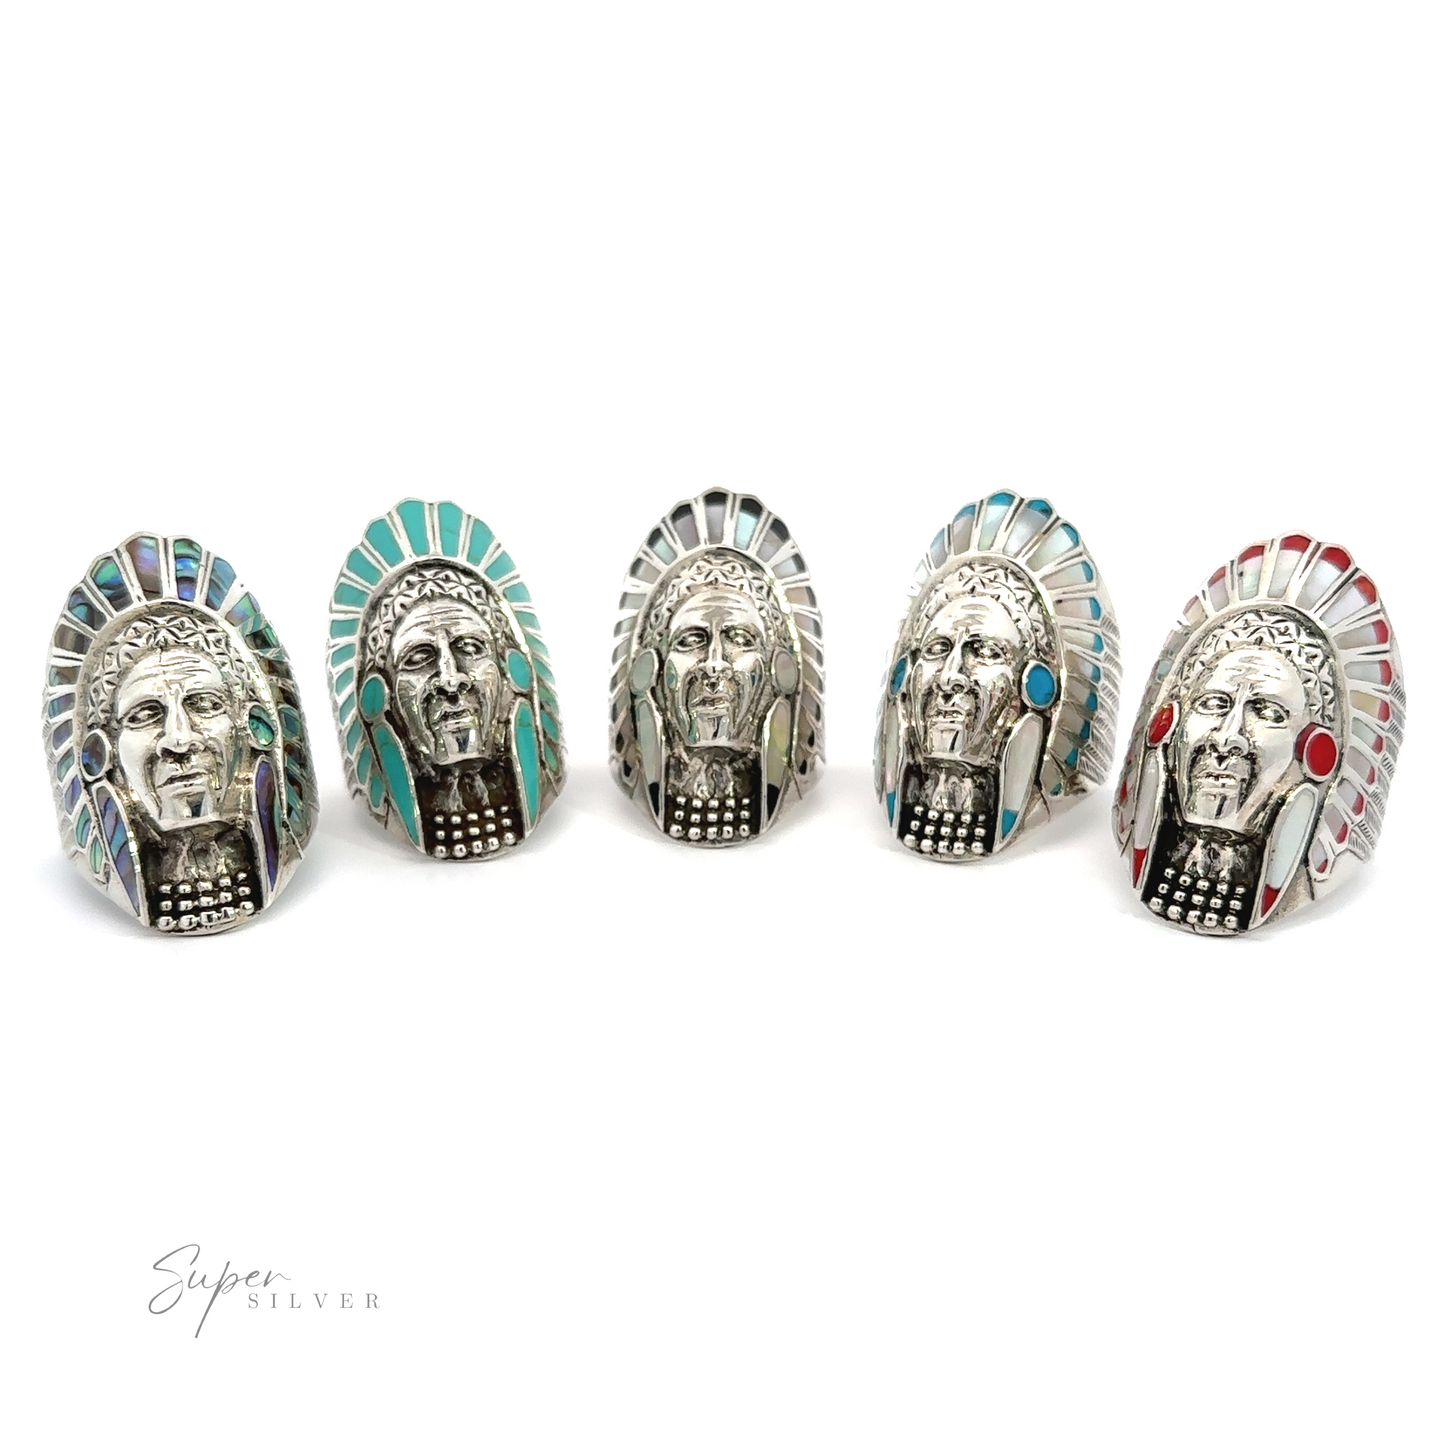 A set of five Inlay Chief Rings adorned with traditional headdress designs, featuring Native American chief motifs.